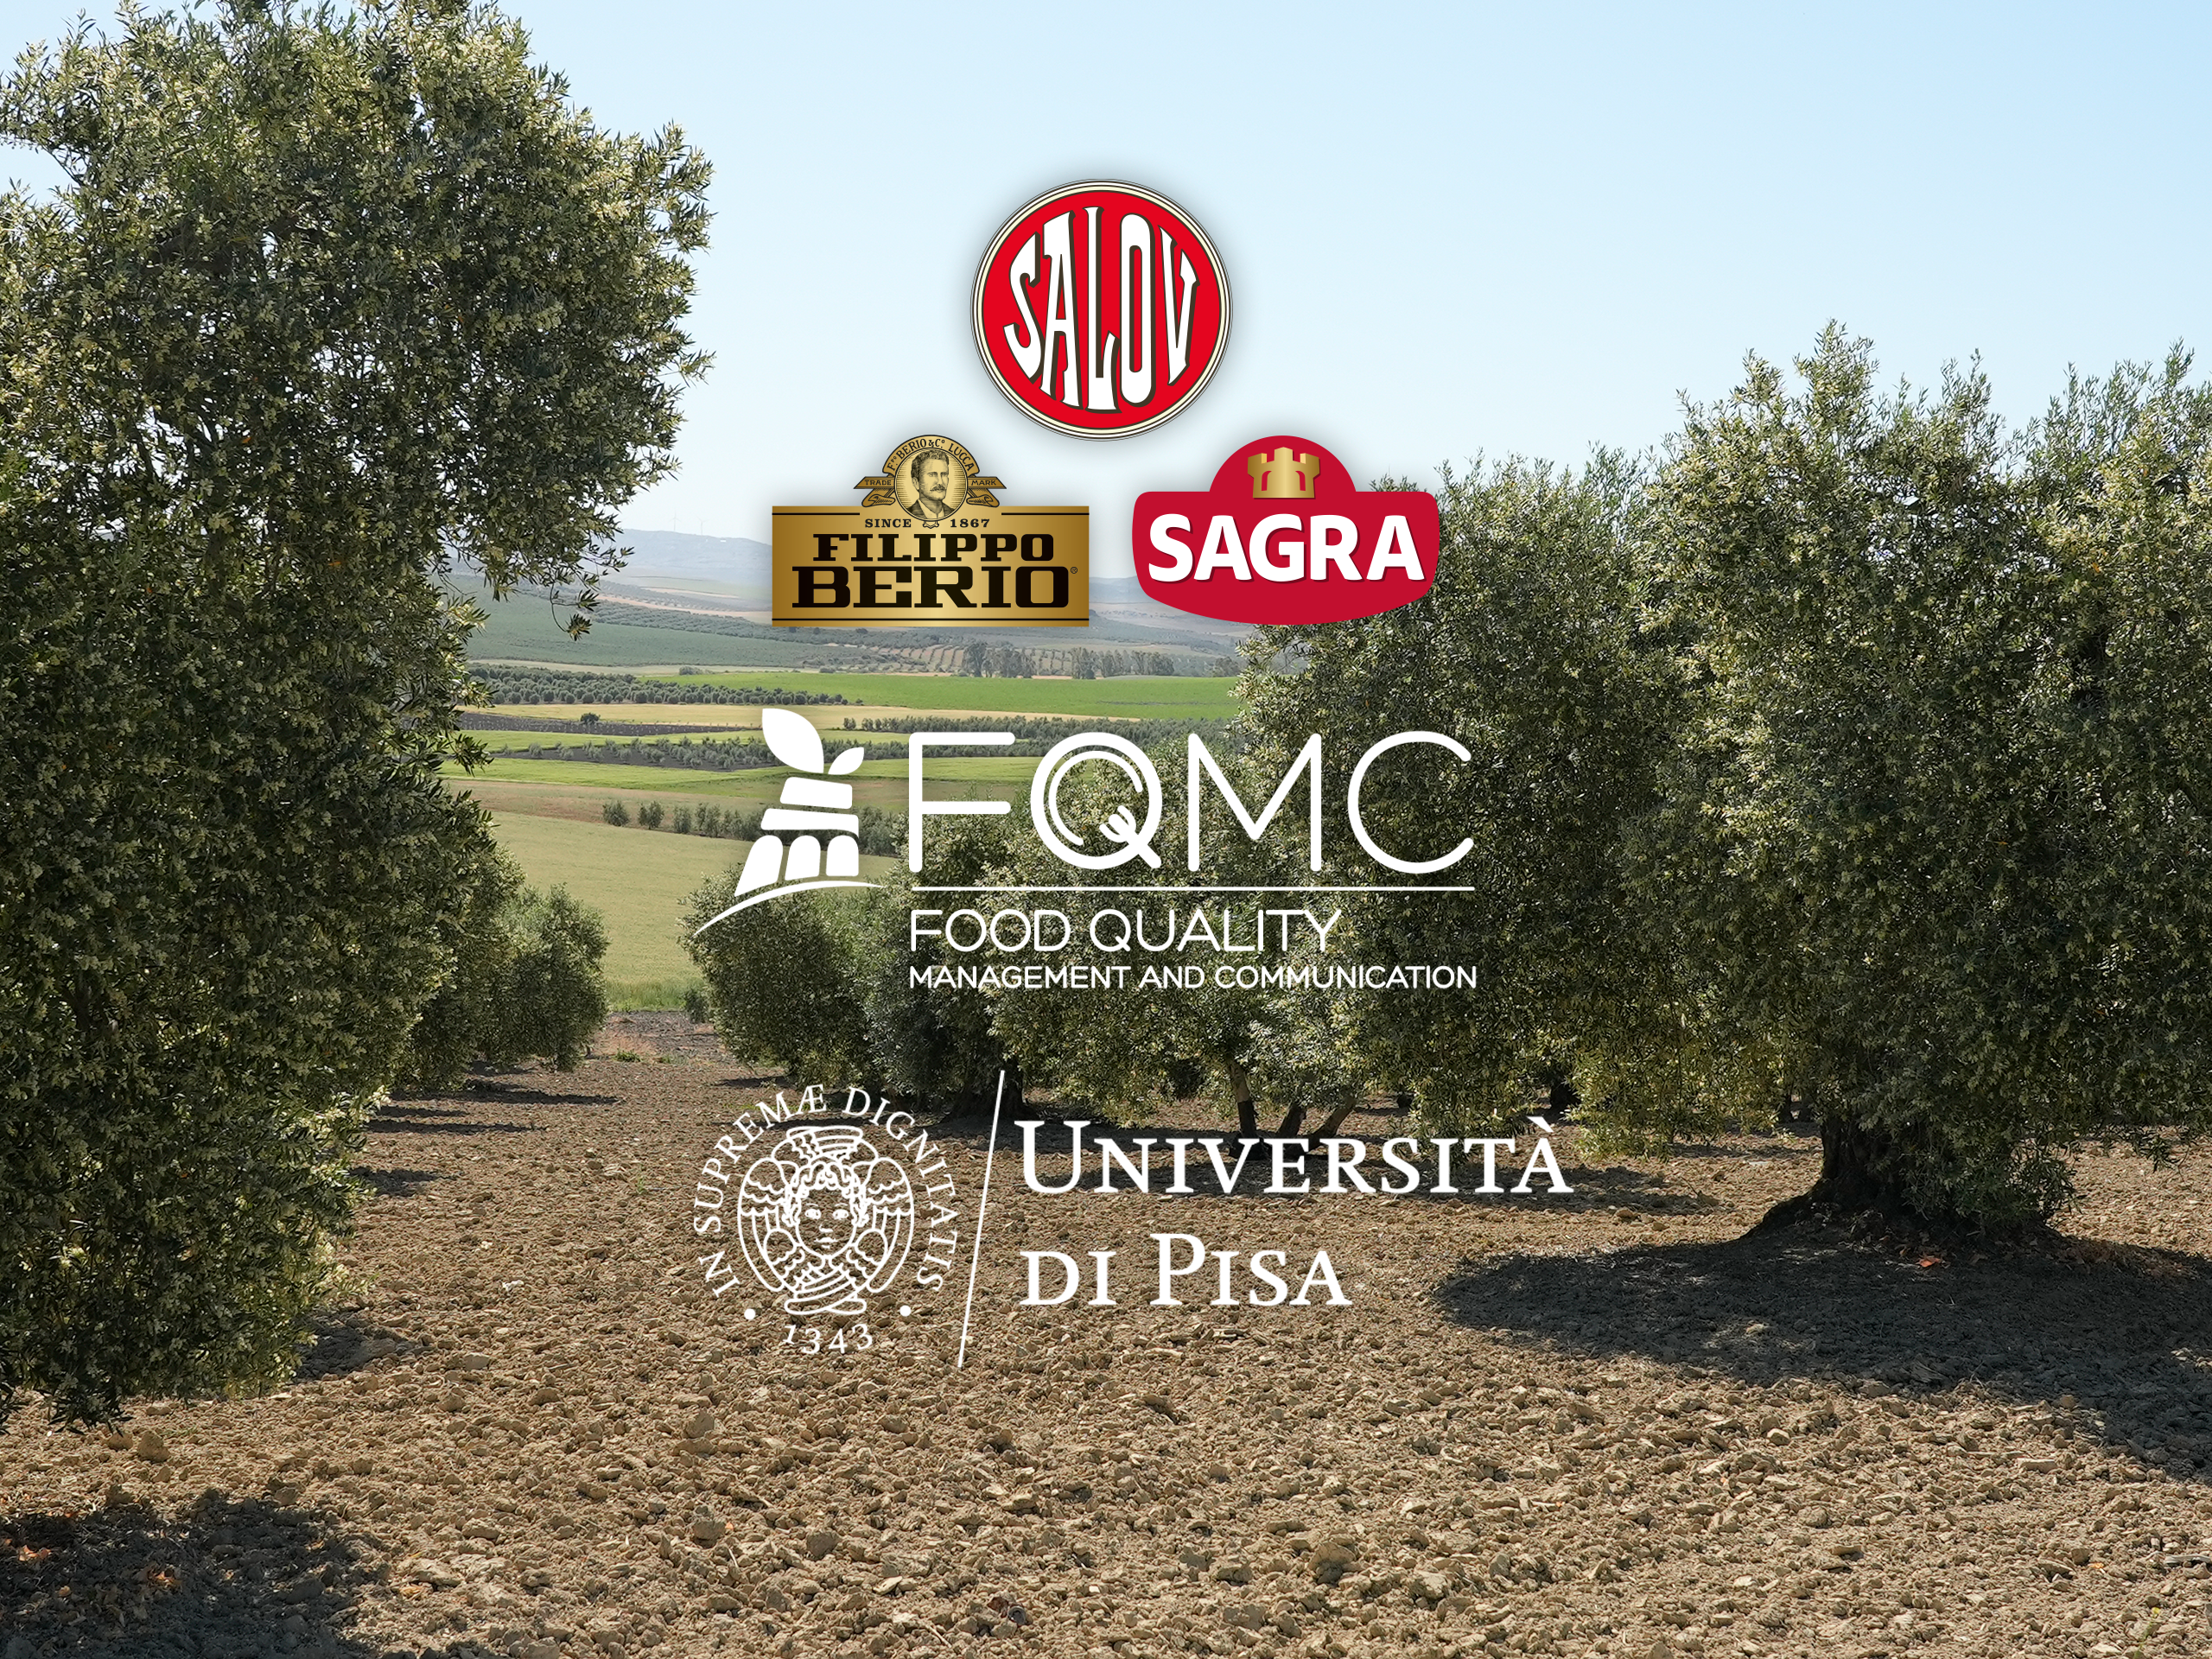 Salov alongside the Master in Food Quality Management and Communication of the University of Pisa.